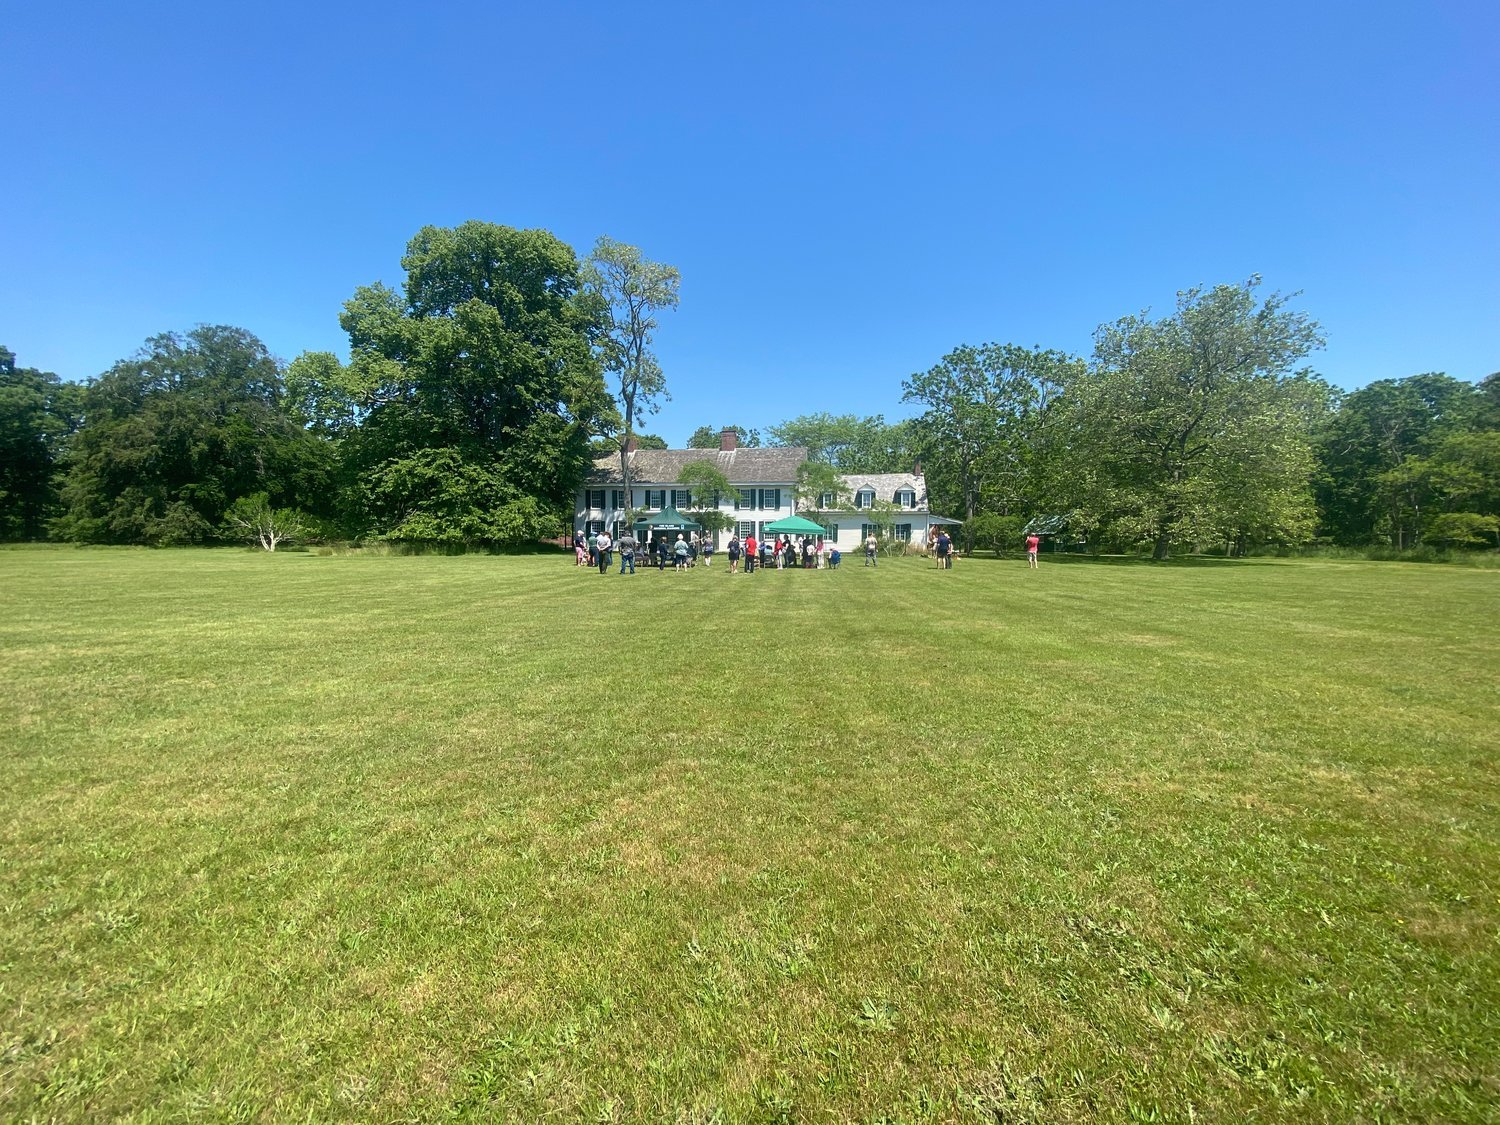 The William Floyd Manor House as seen from the great lawn earlier this year at the annual Tri-Hamlet Day event.